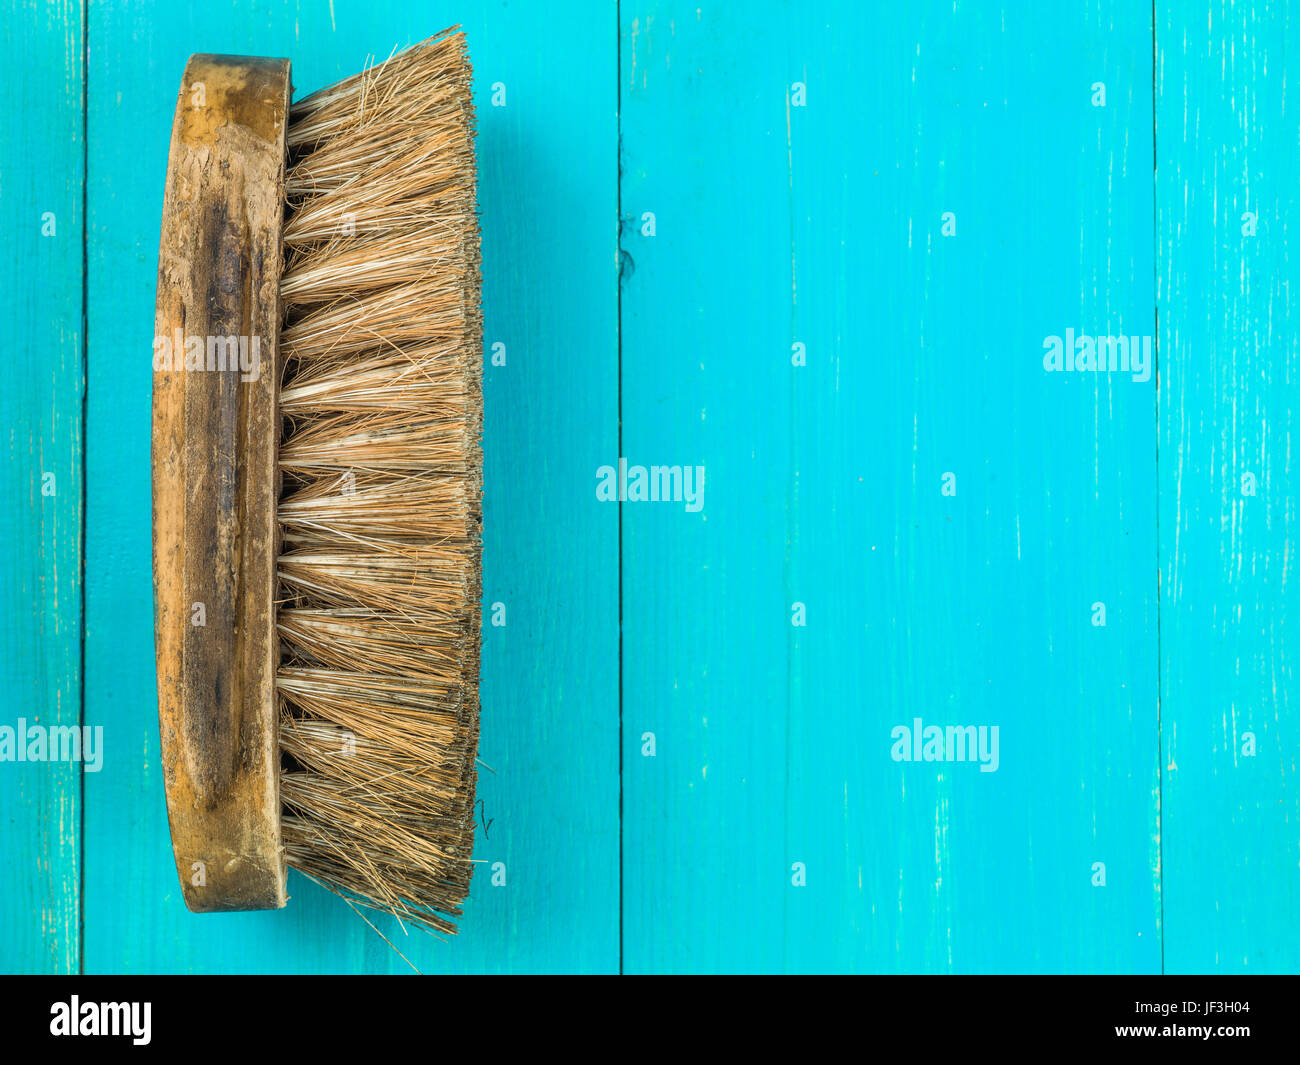 Image of a Natural Bristle Scrubbing Brush Against a Blue Background Stock Photo